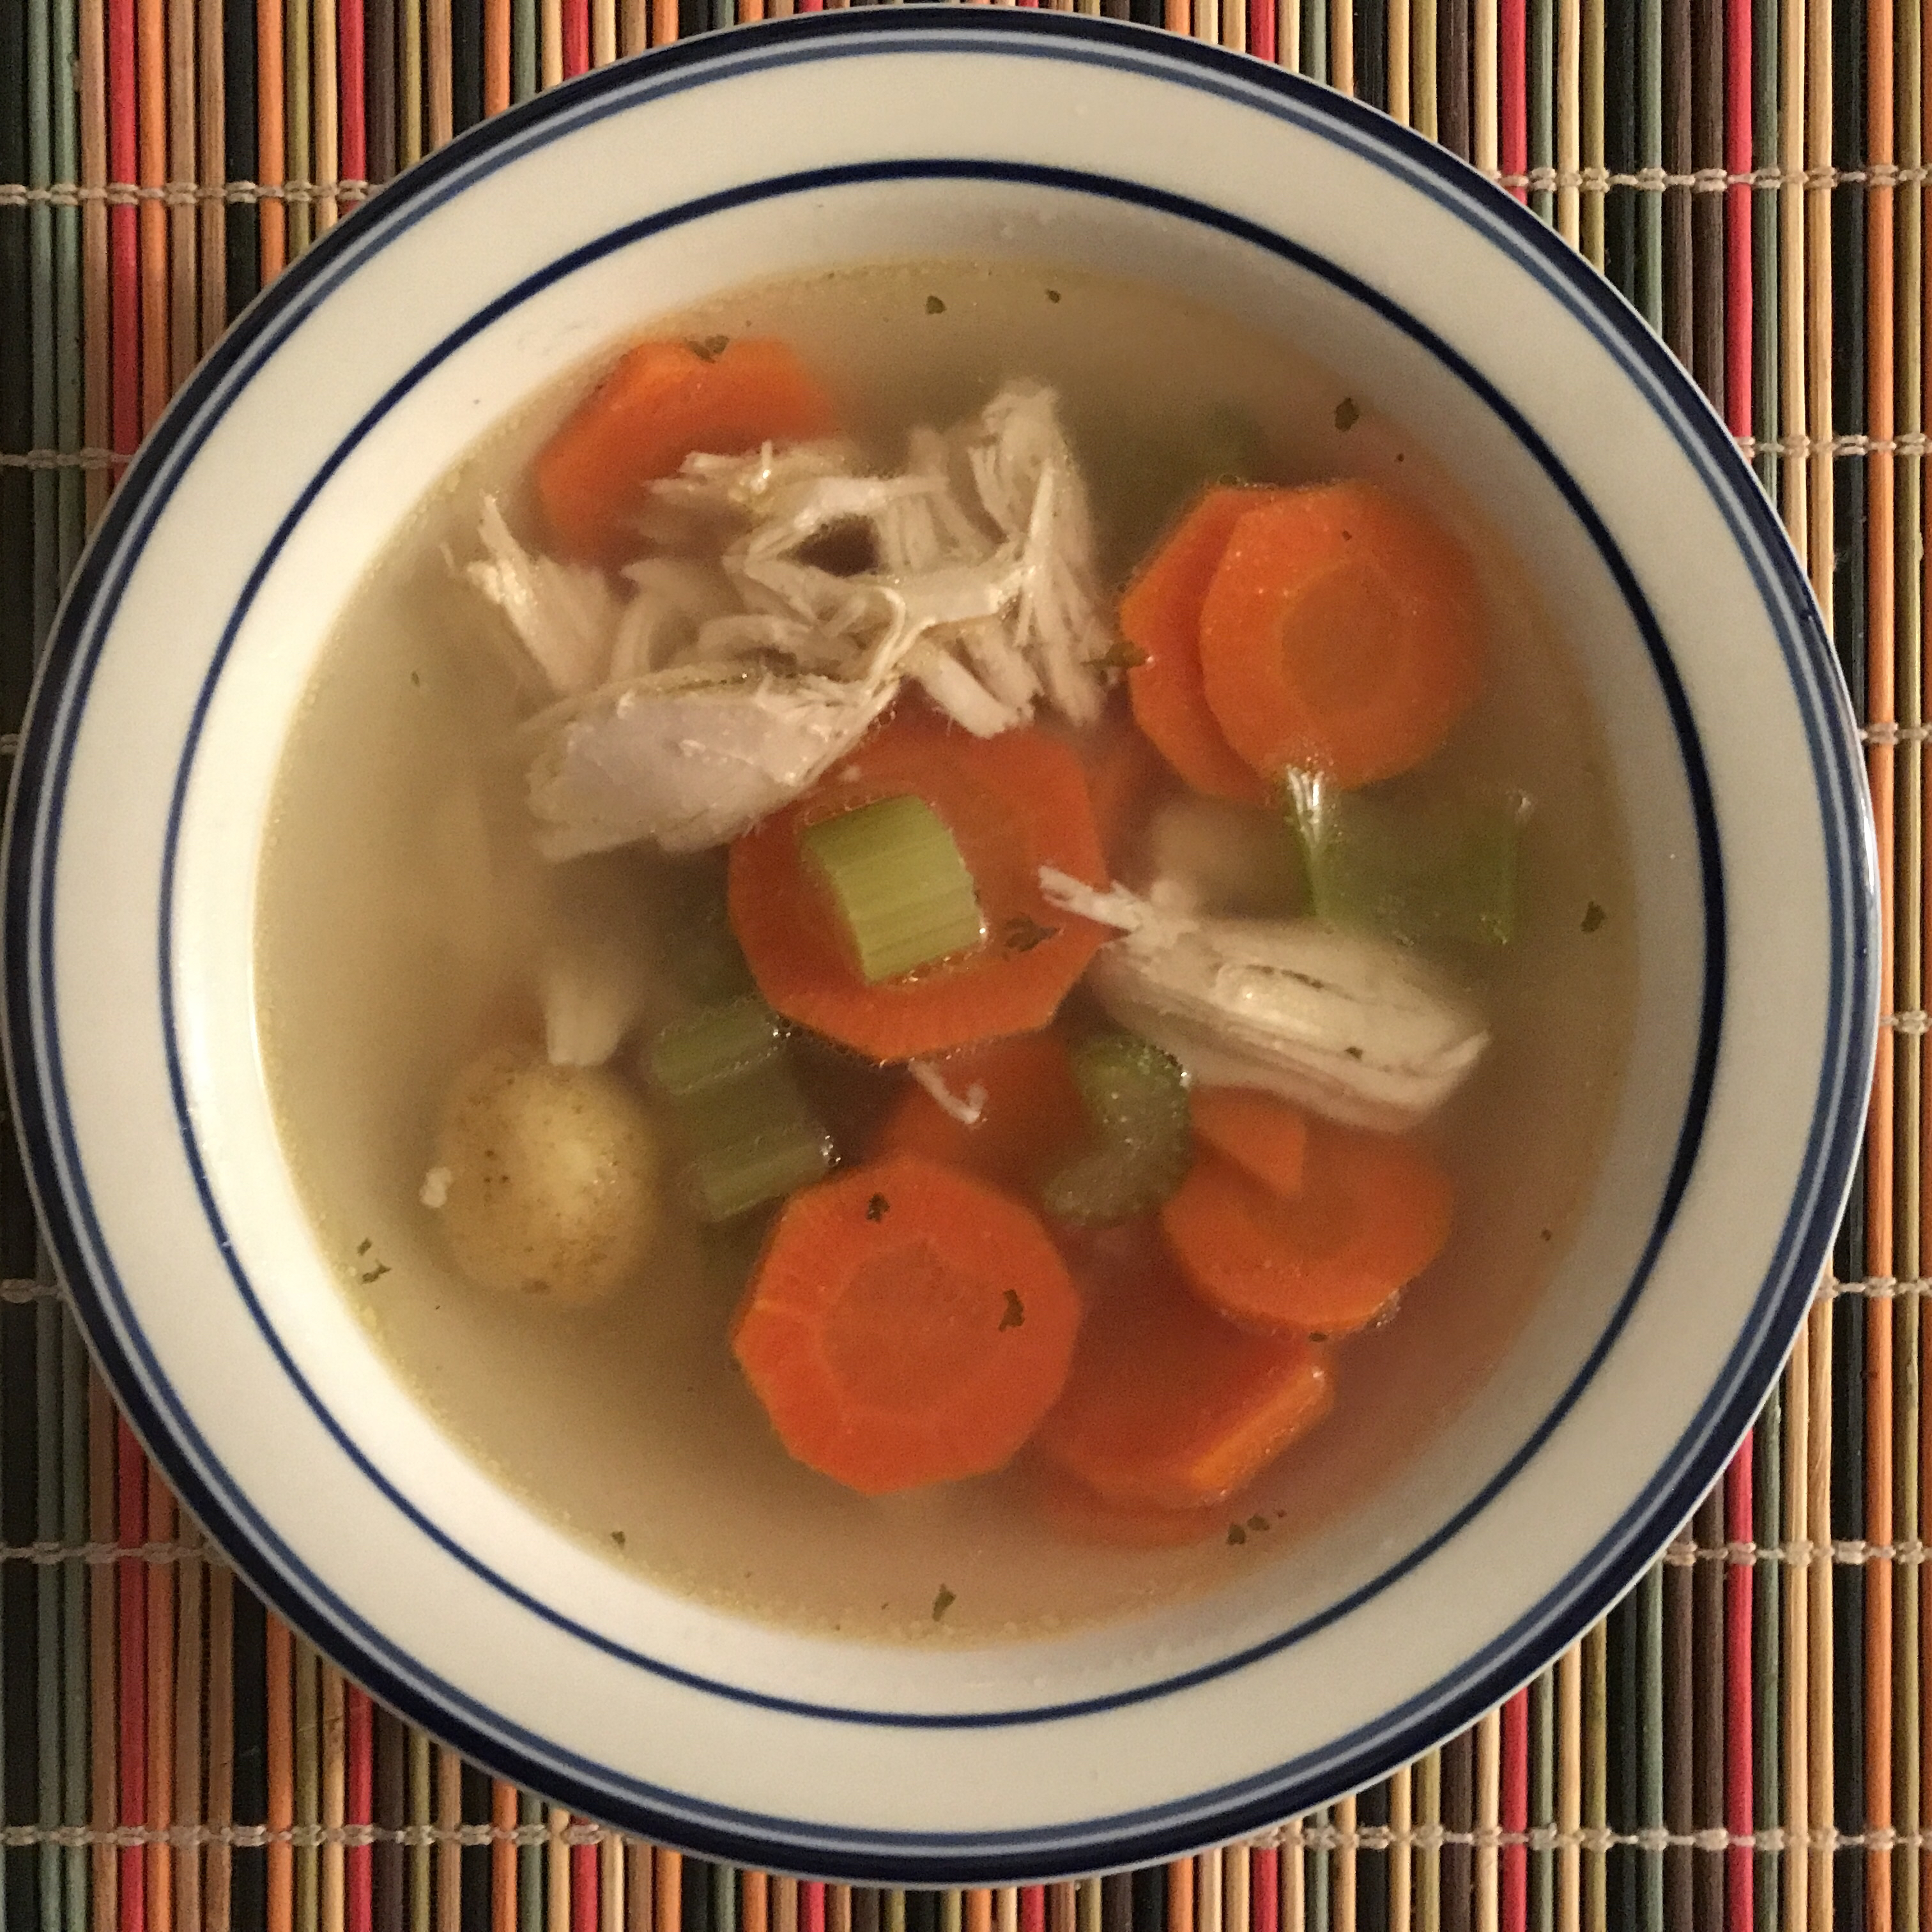 Home Made Chicken Noodle Soup!